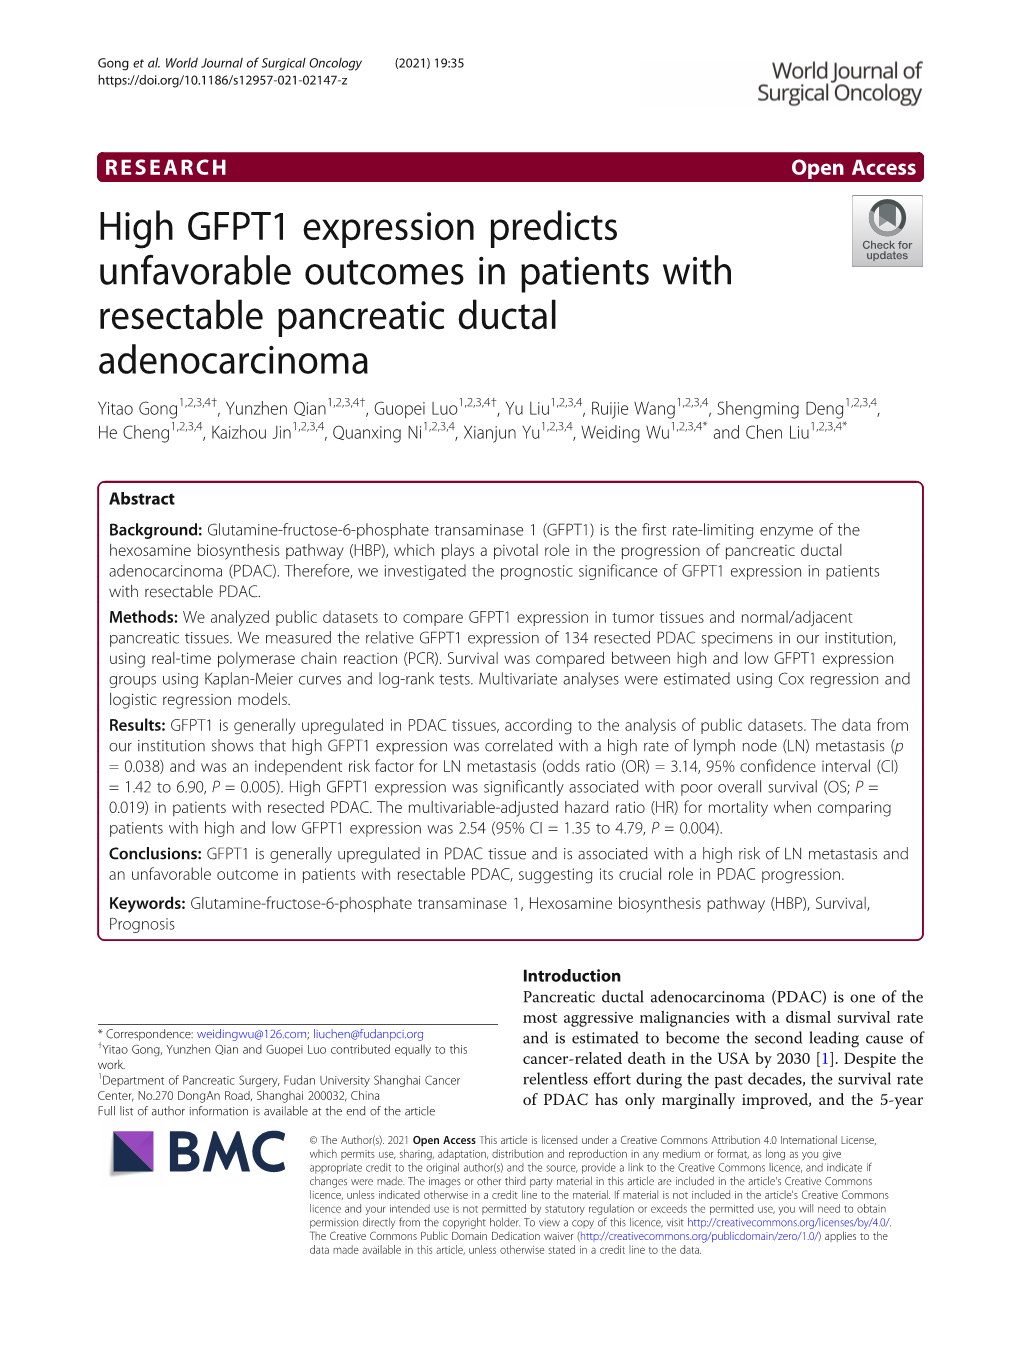 High GFPT1 Expression Predicts Unfavorable Outcomes in Patients